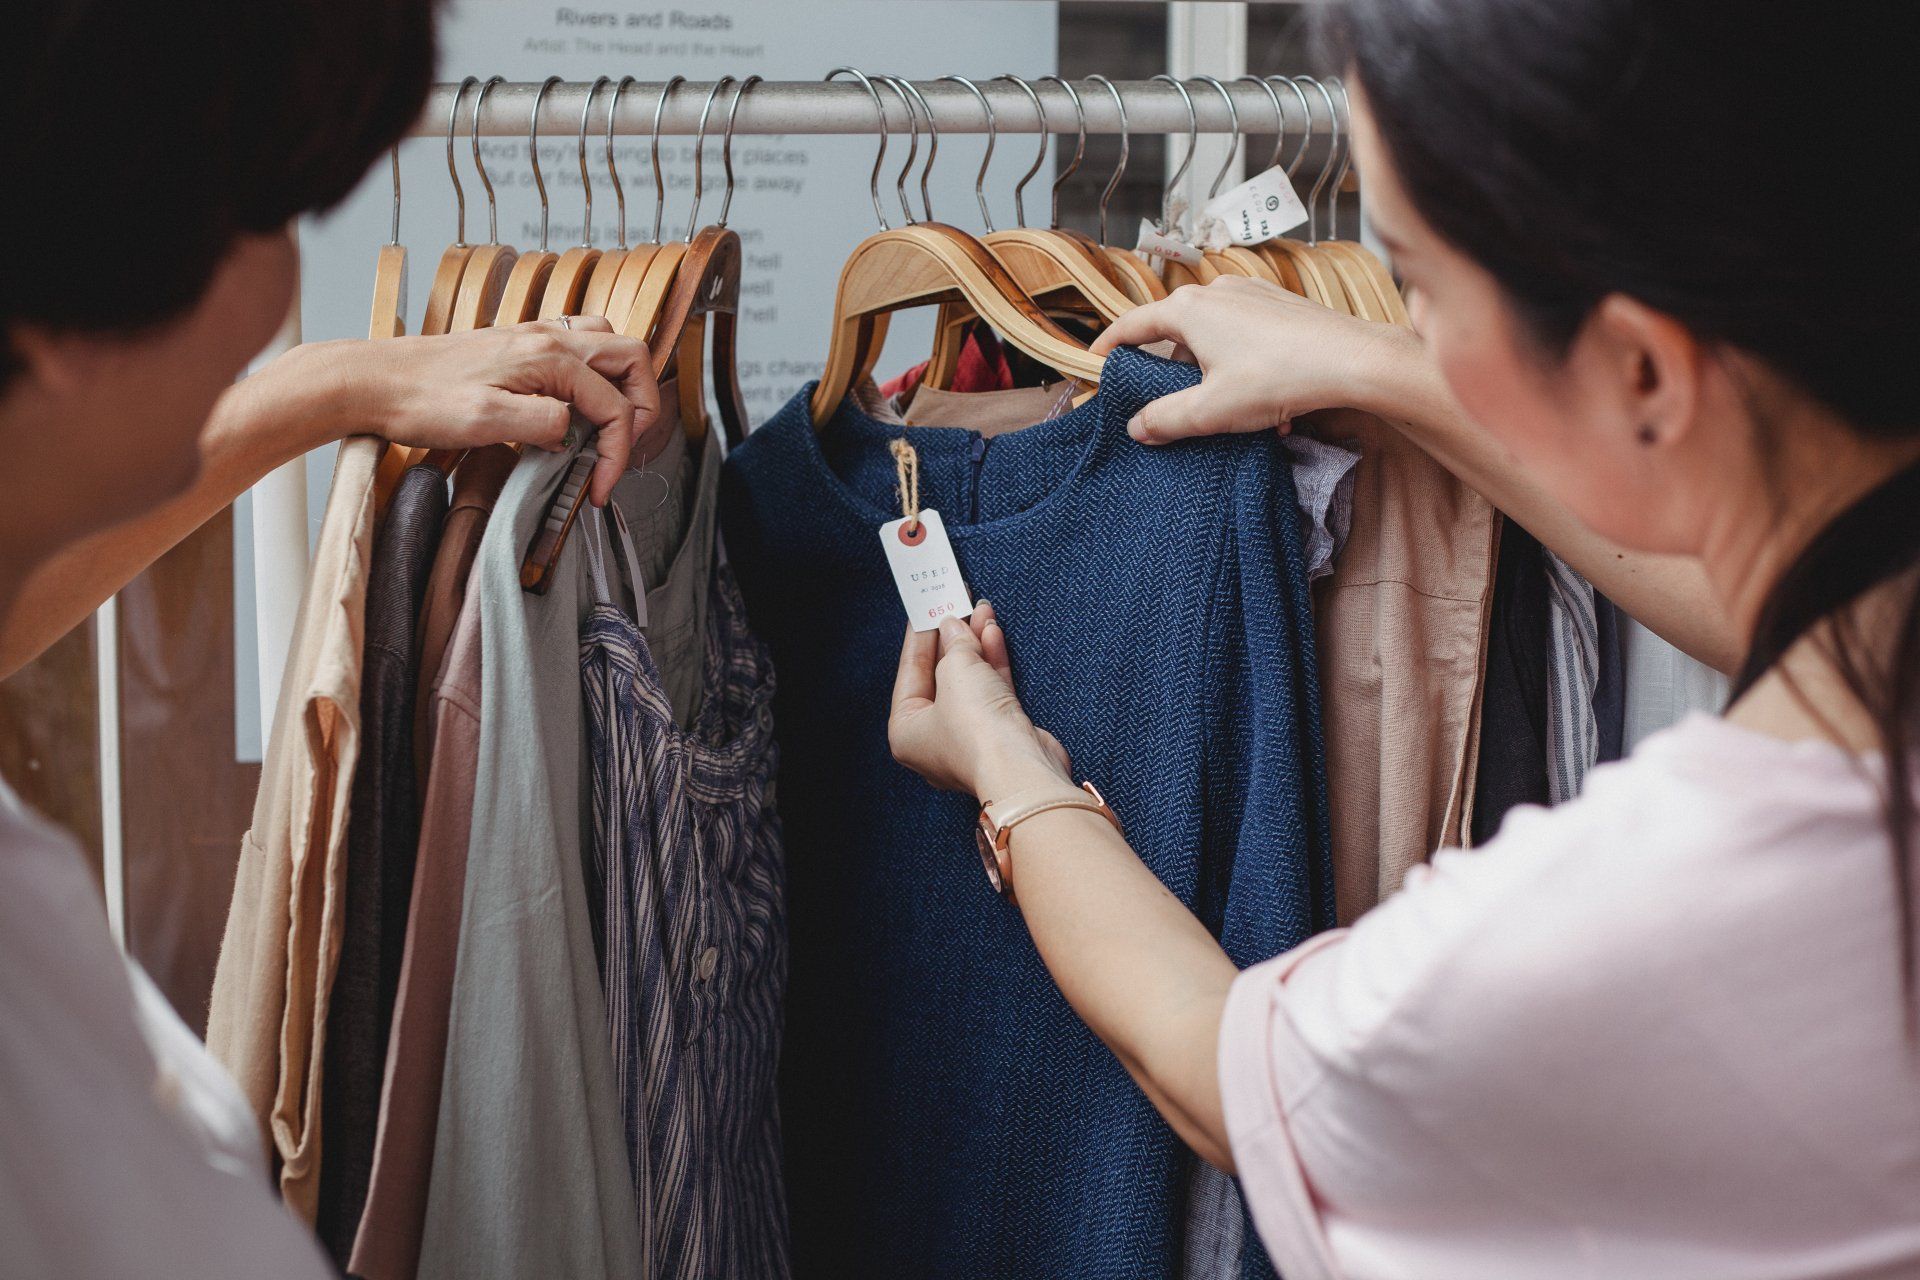 Two women are looking at clothes on a rack in a store.